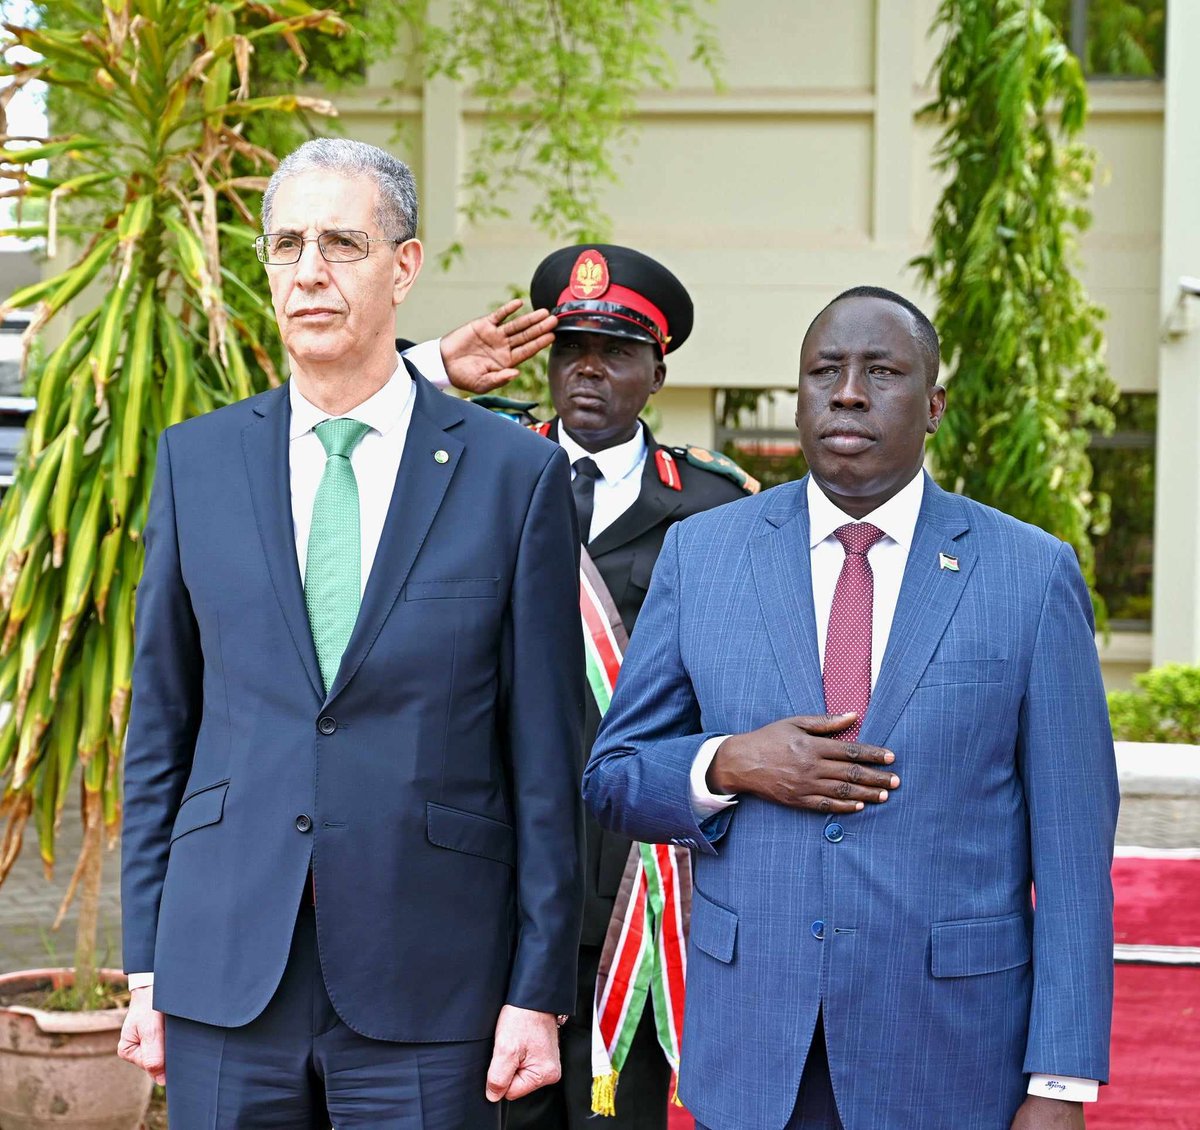 The President of the Republic of South Sudan, H.E Salva Kiir Mayardit received letters of credence from the non-resident Ambassador of Algeria to Juba H.E MAHI Boumediene in a formal ceremony at the Government General Secretariat on April 4, 2024.